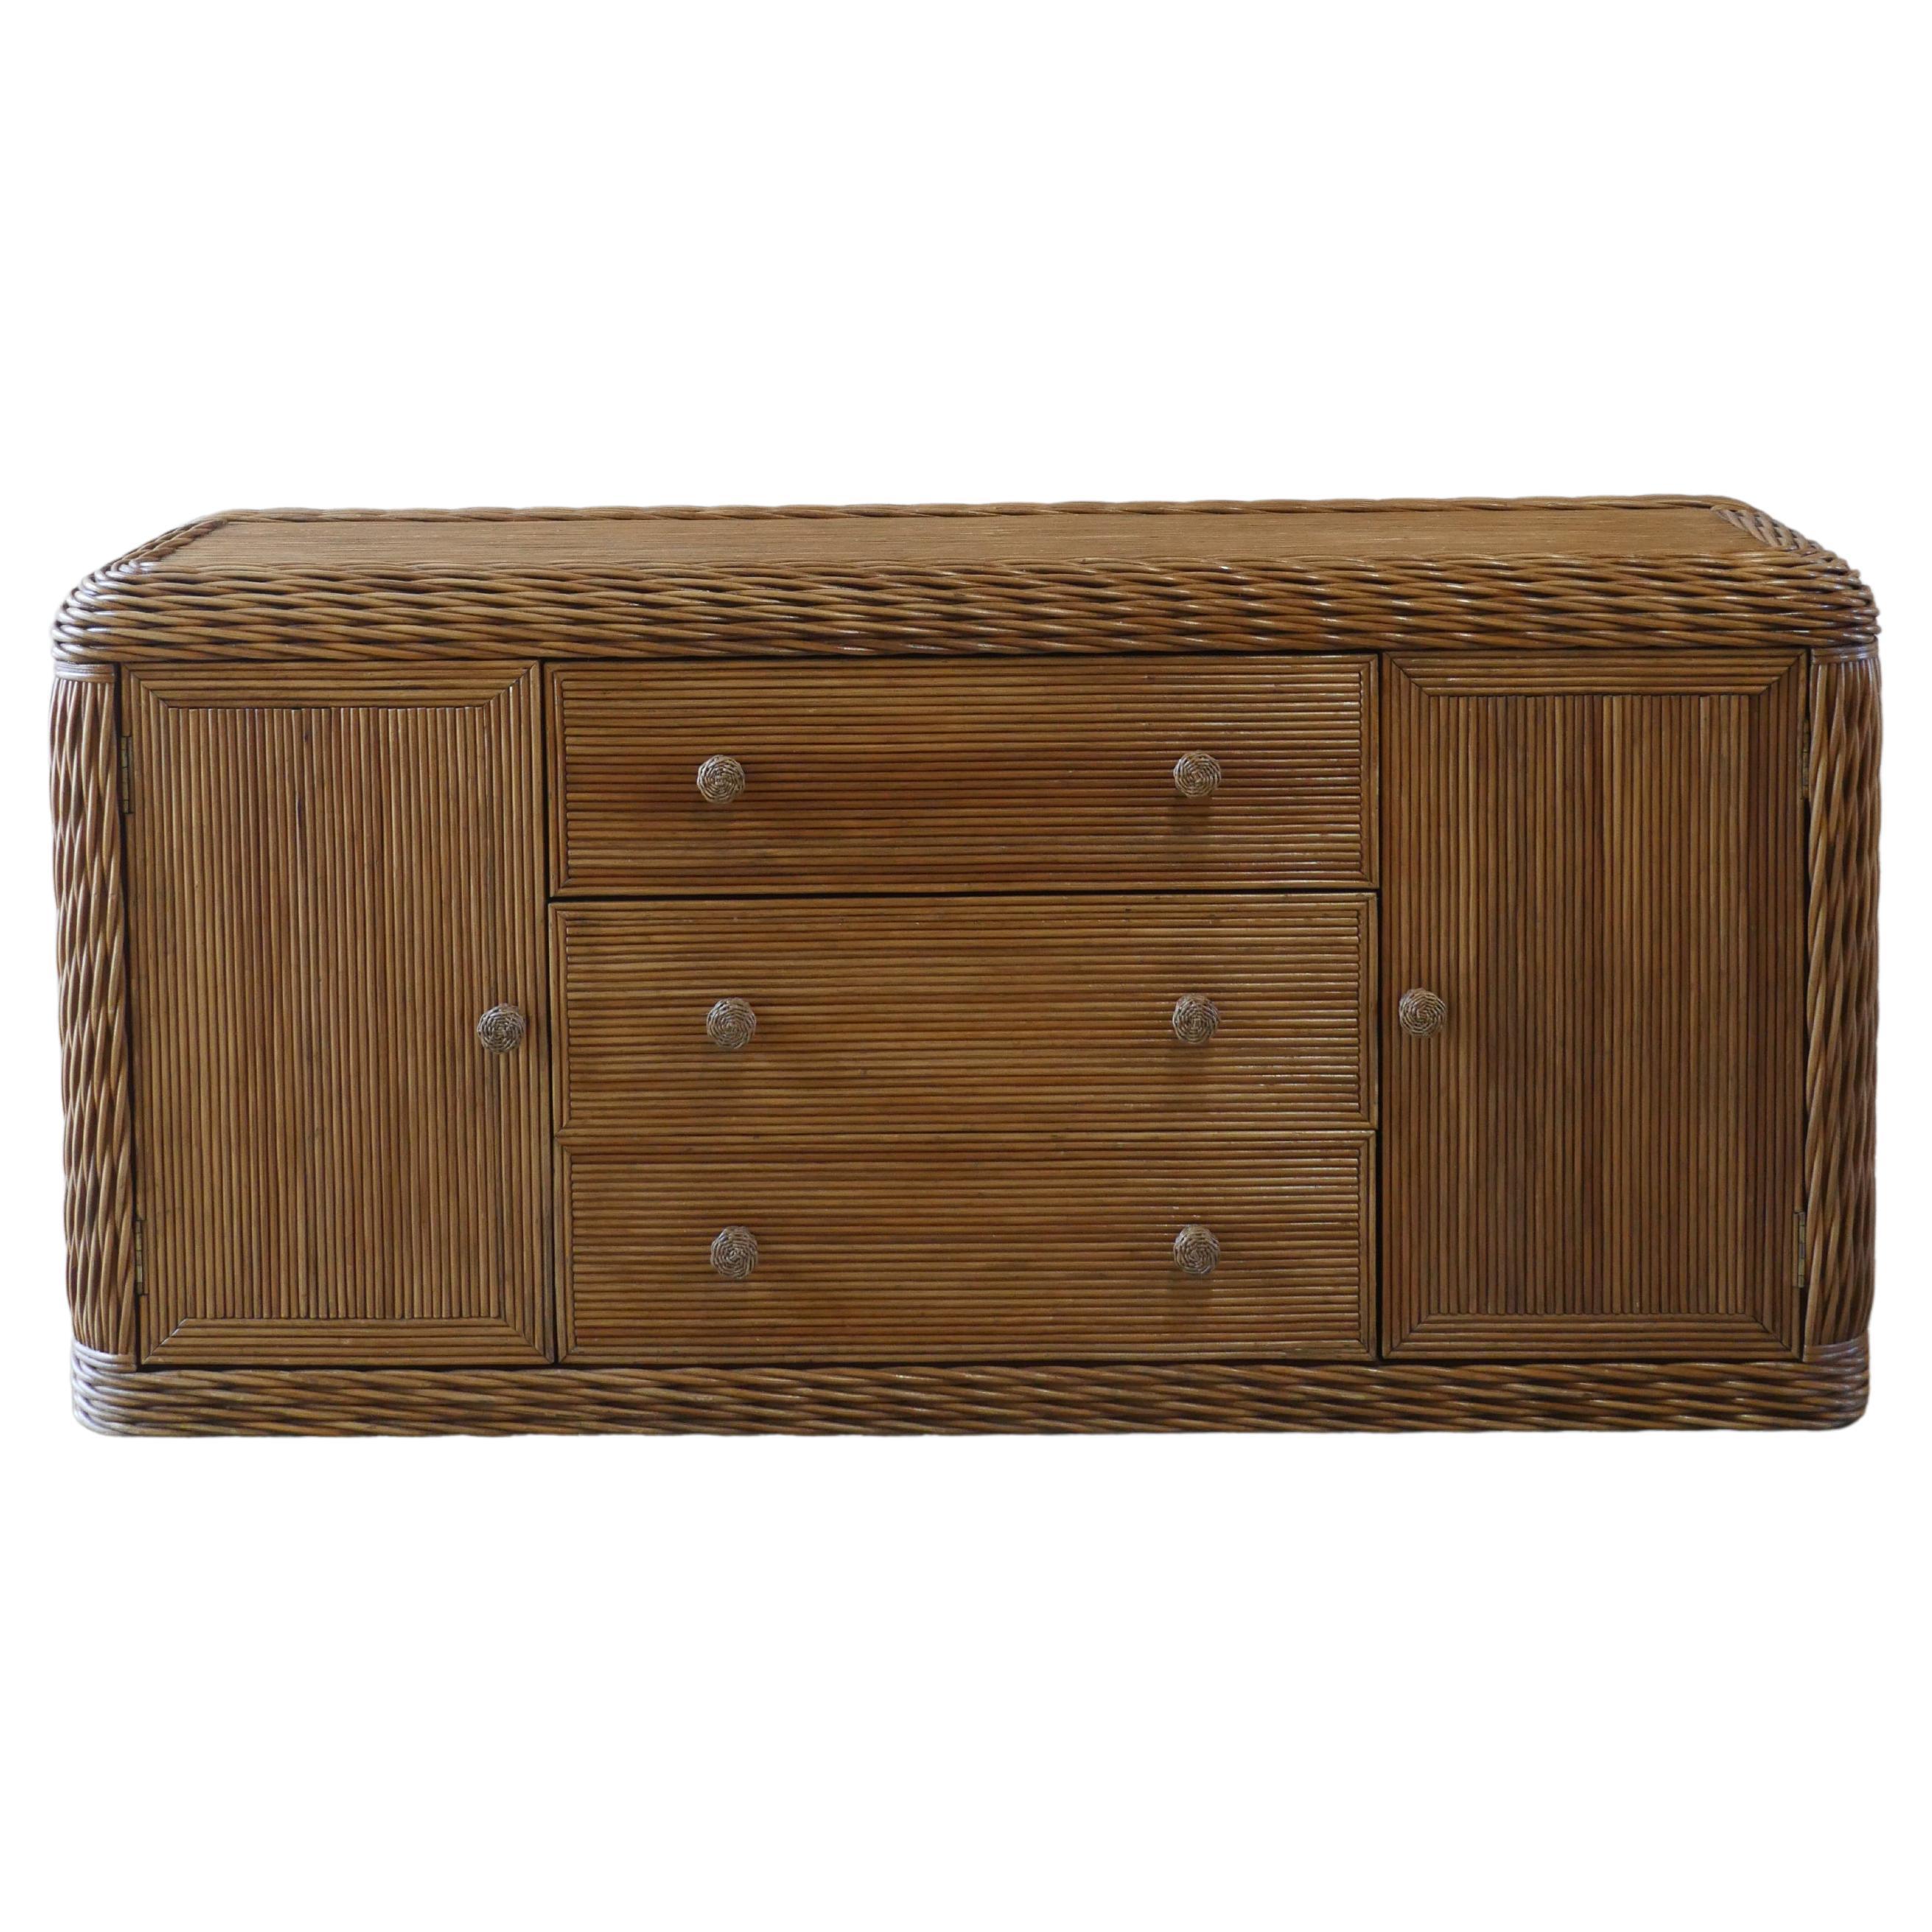 Coastal Pencil Reed Rattan and Braided Wicker Credenza